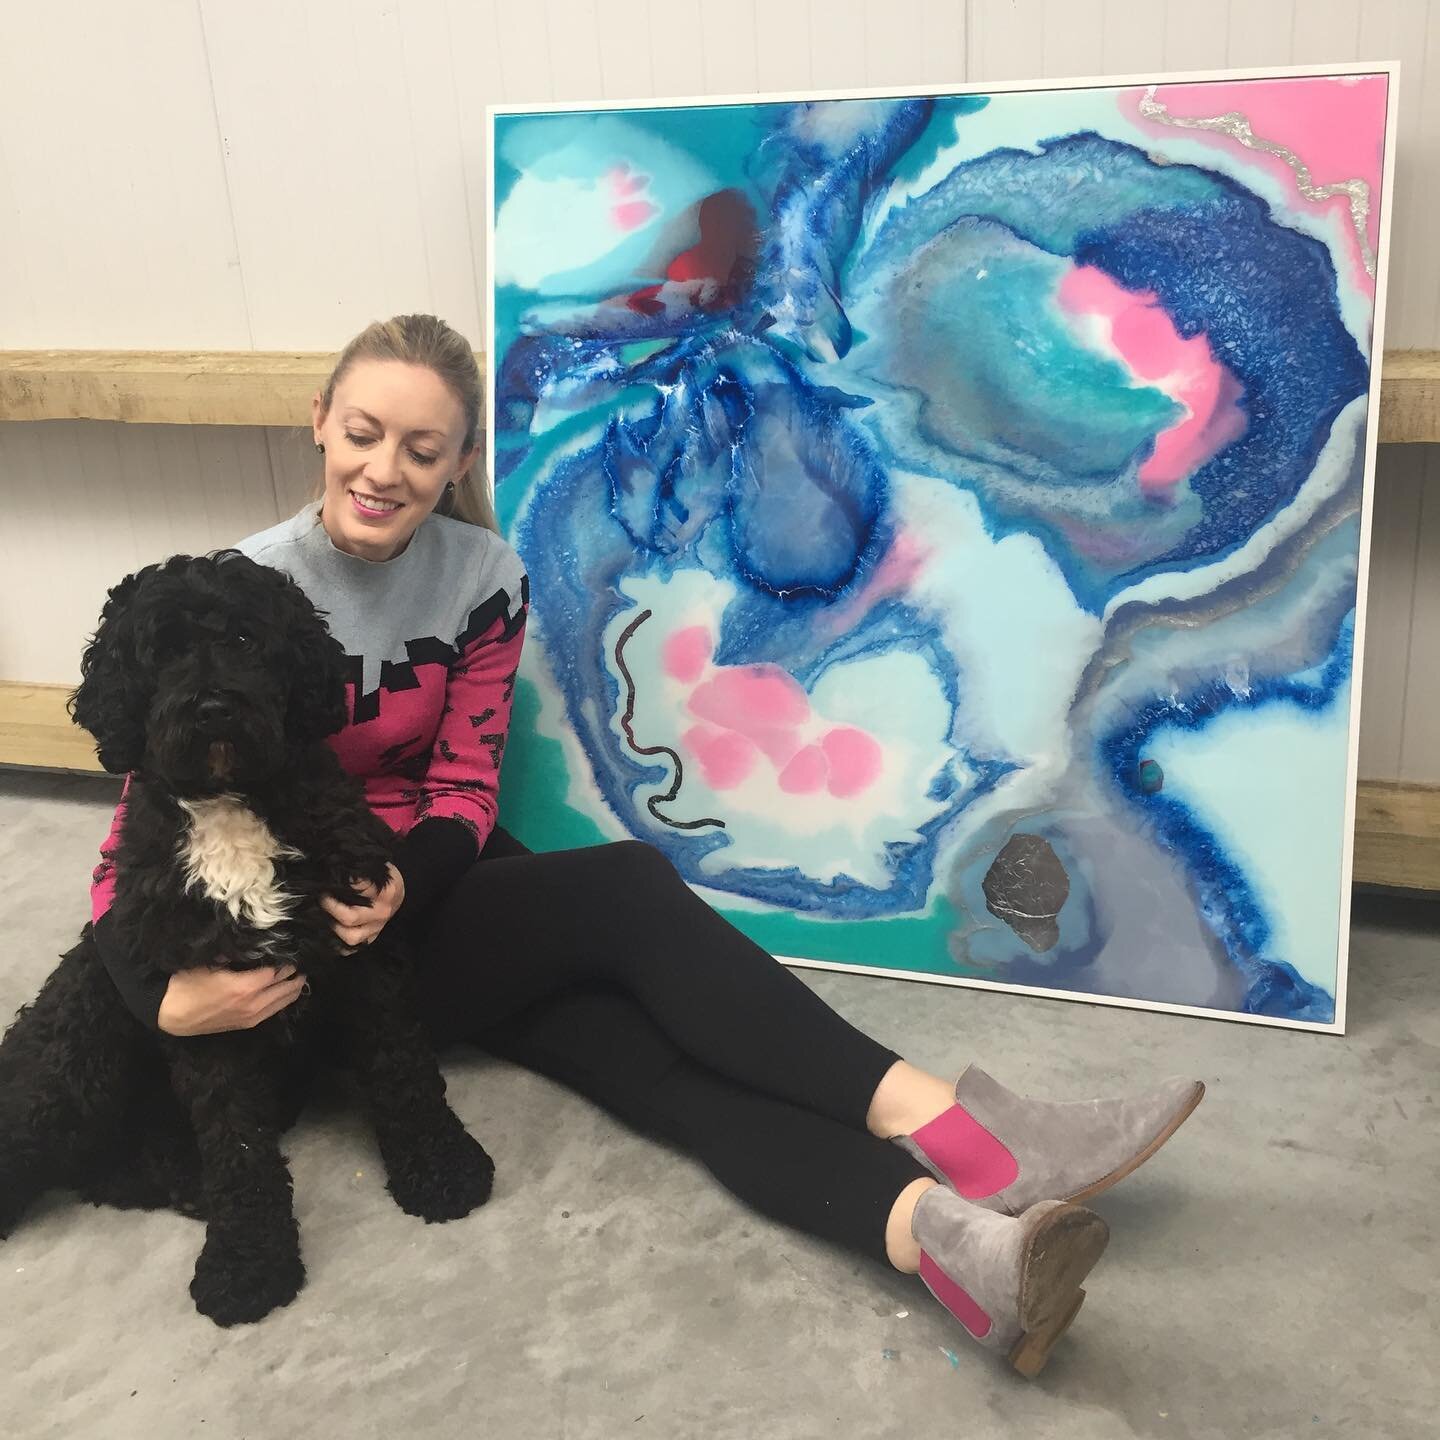 Cuteness overload 🥰 
If you can peel your eyes away from the handsome dog you&rsquo;ll notice &ldquo;Luminosity 32&rdquo; 😁
This is a sneak peek at one of the paintings that will be released in November. This piece is 100x100cm framed in a white fr